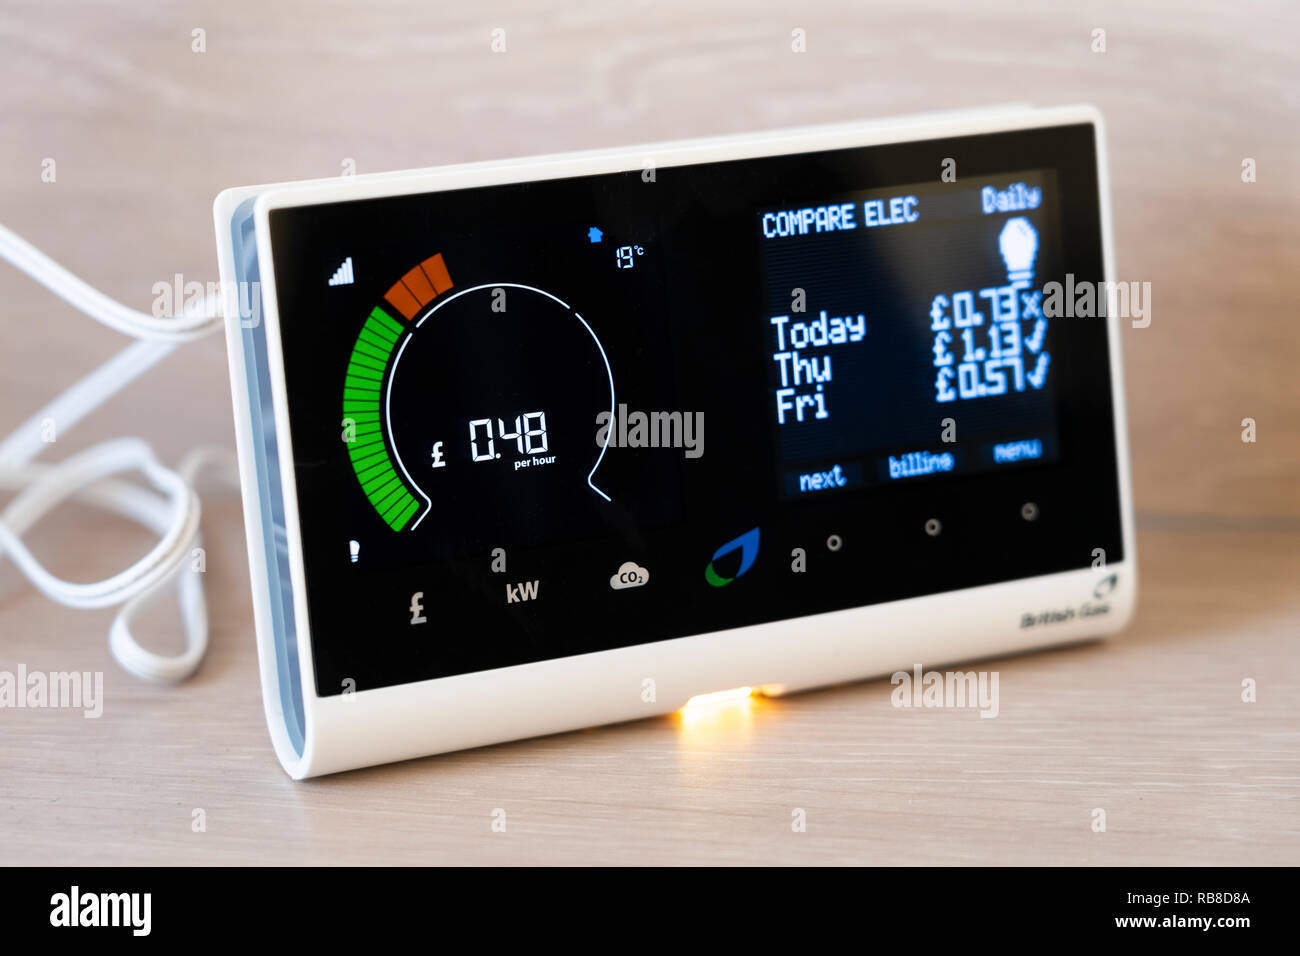 A British Gas smart meter in a home showing electricity consumption per hour and comparing with previous days usage Stock Photo